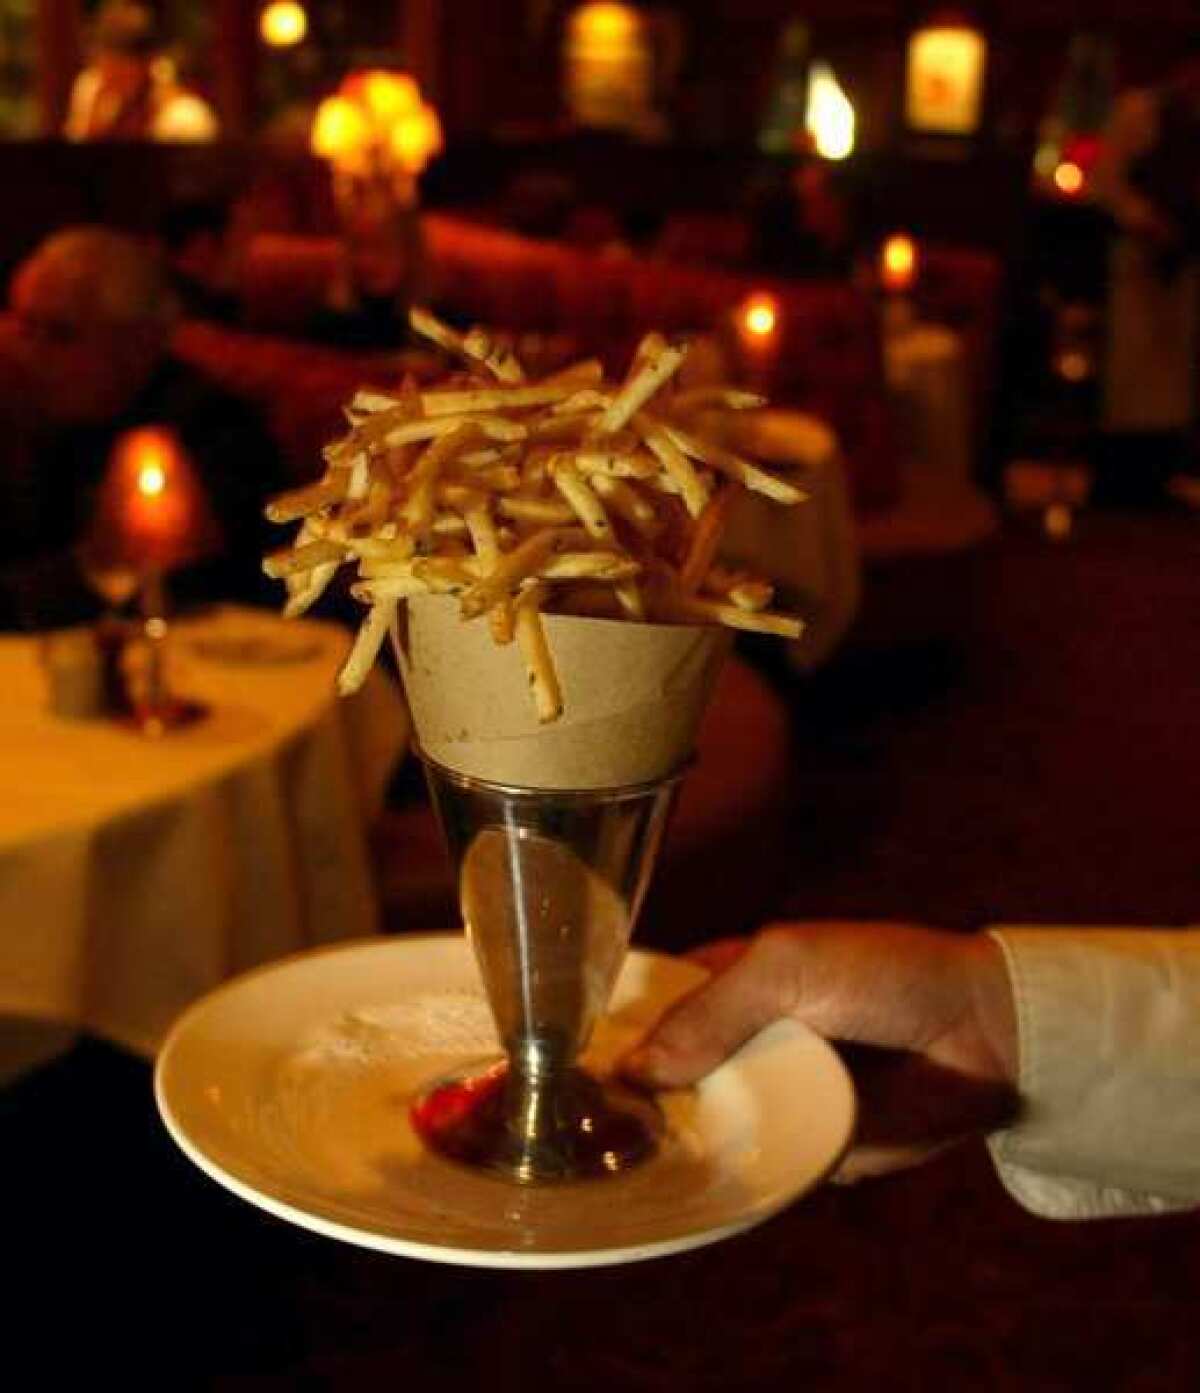 The ultra thin pommes frites at Chat Noir.